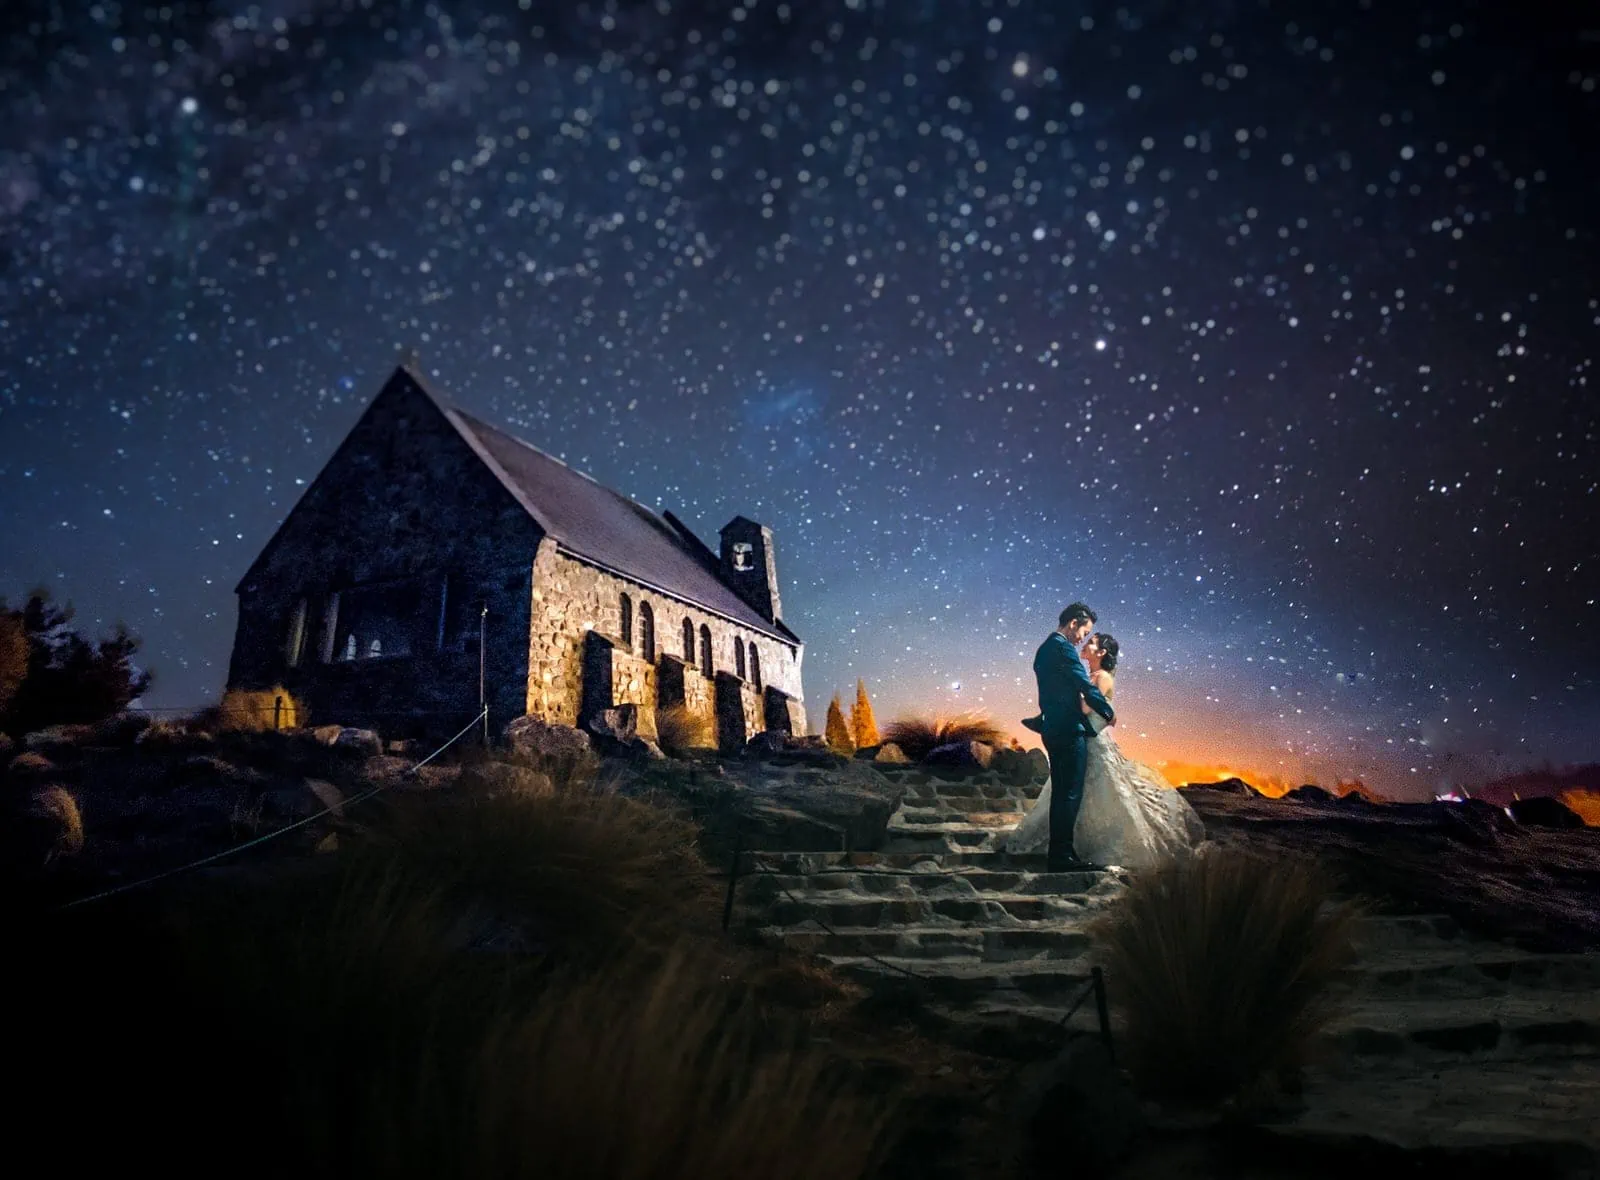 Queenstown New Zealand Elopement Wedding Photographer - A bride and groom pose under the stars in front of a church for their Starry Night shoot.